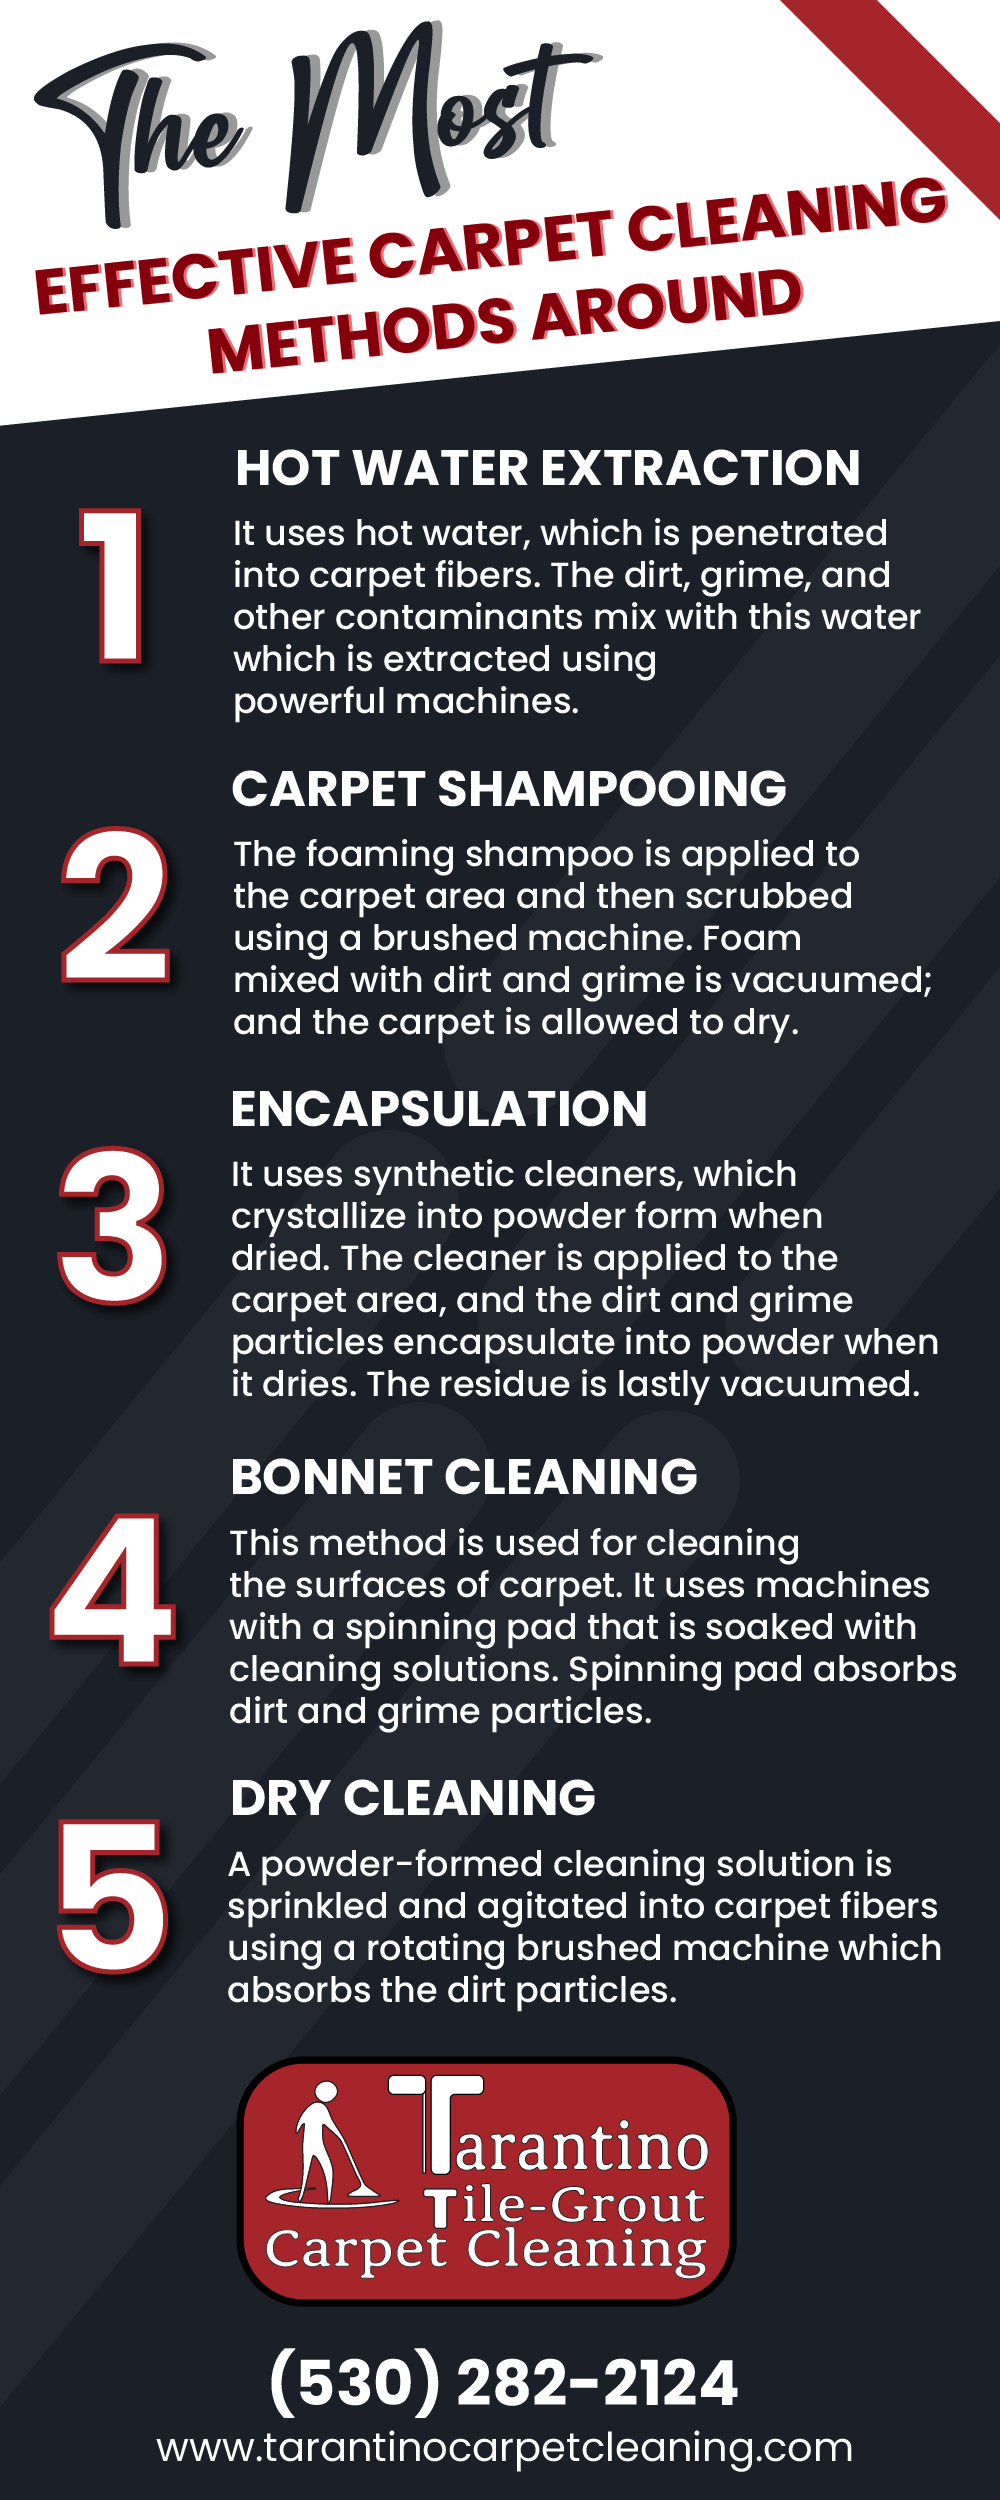 The Most Effective Carpet Cleaning Methods Around